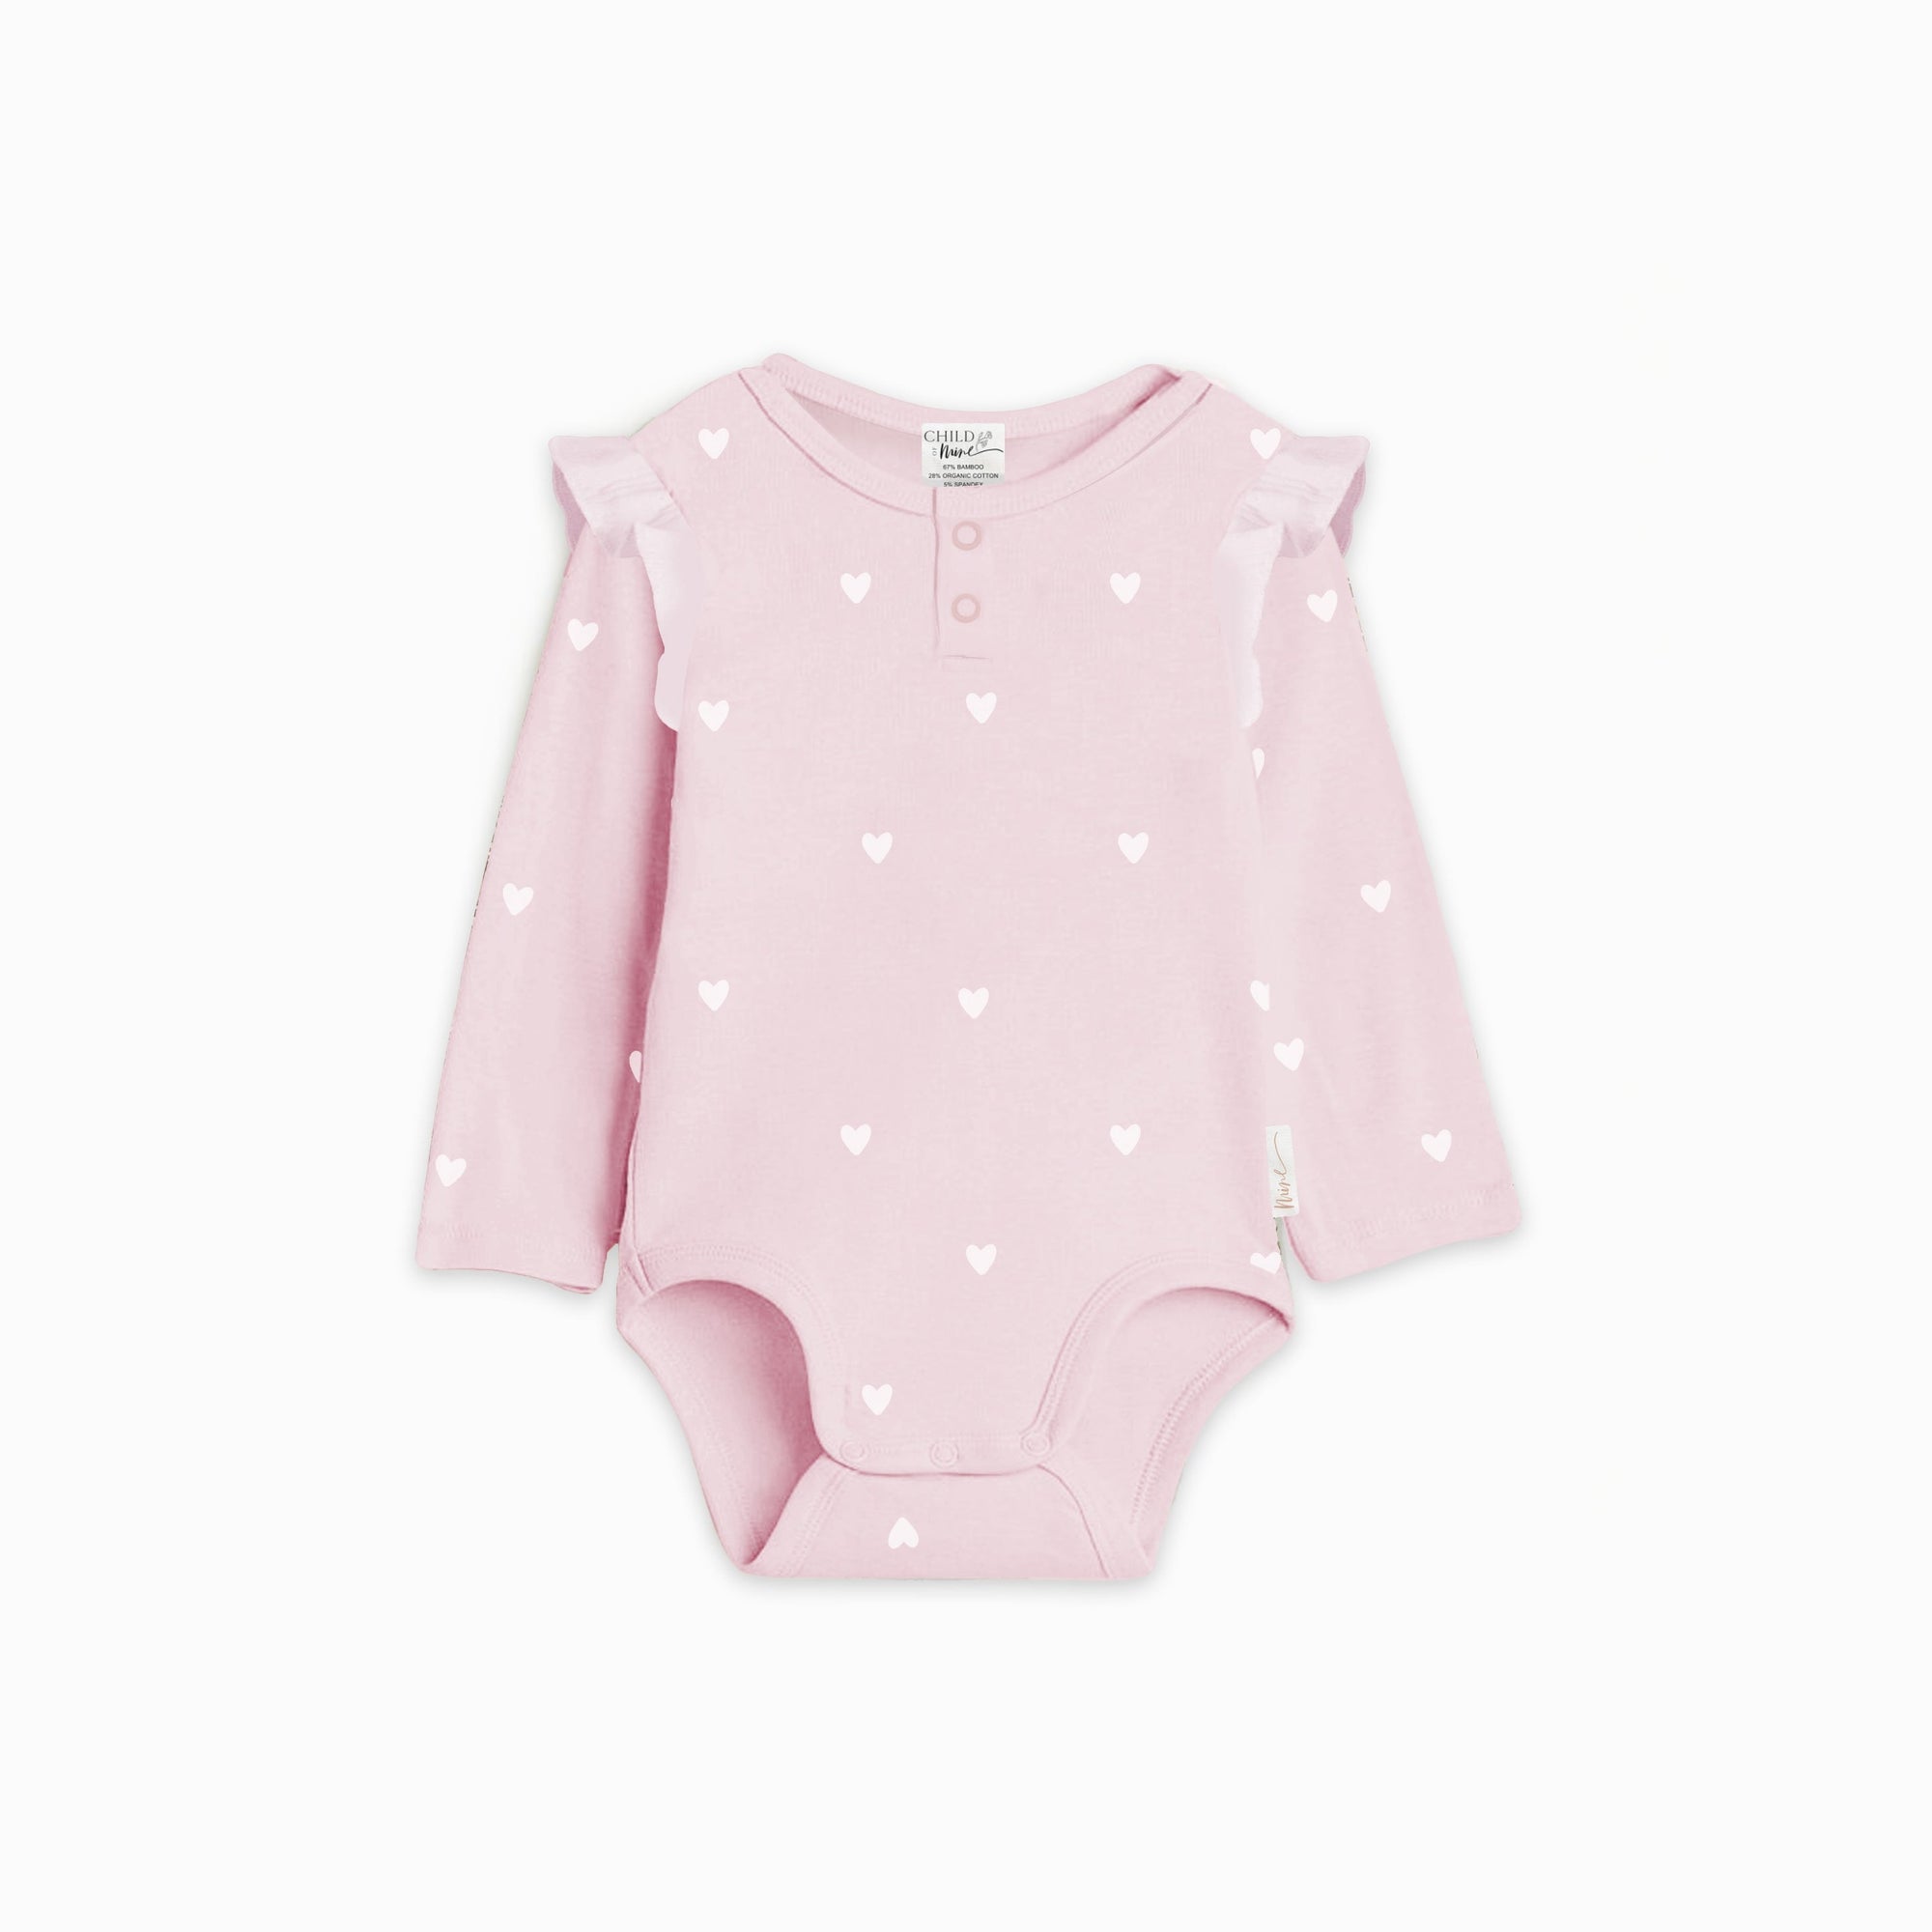 Child Of Mine Frilly Bodysuit - Pink Hearts